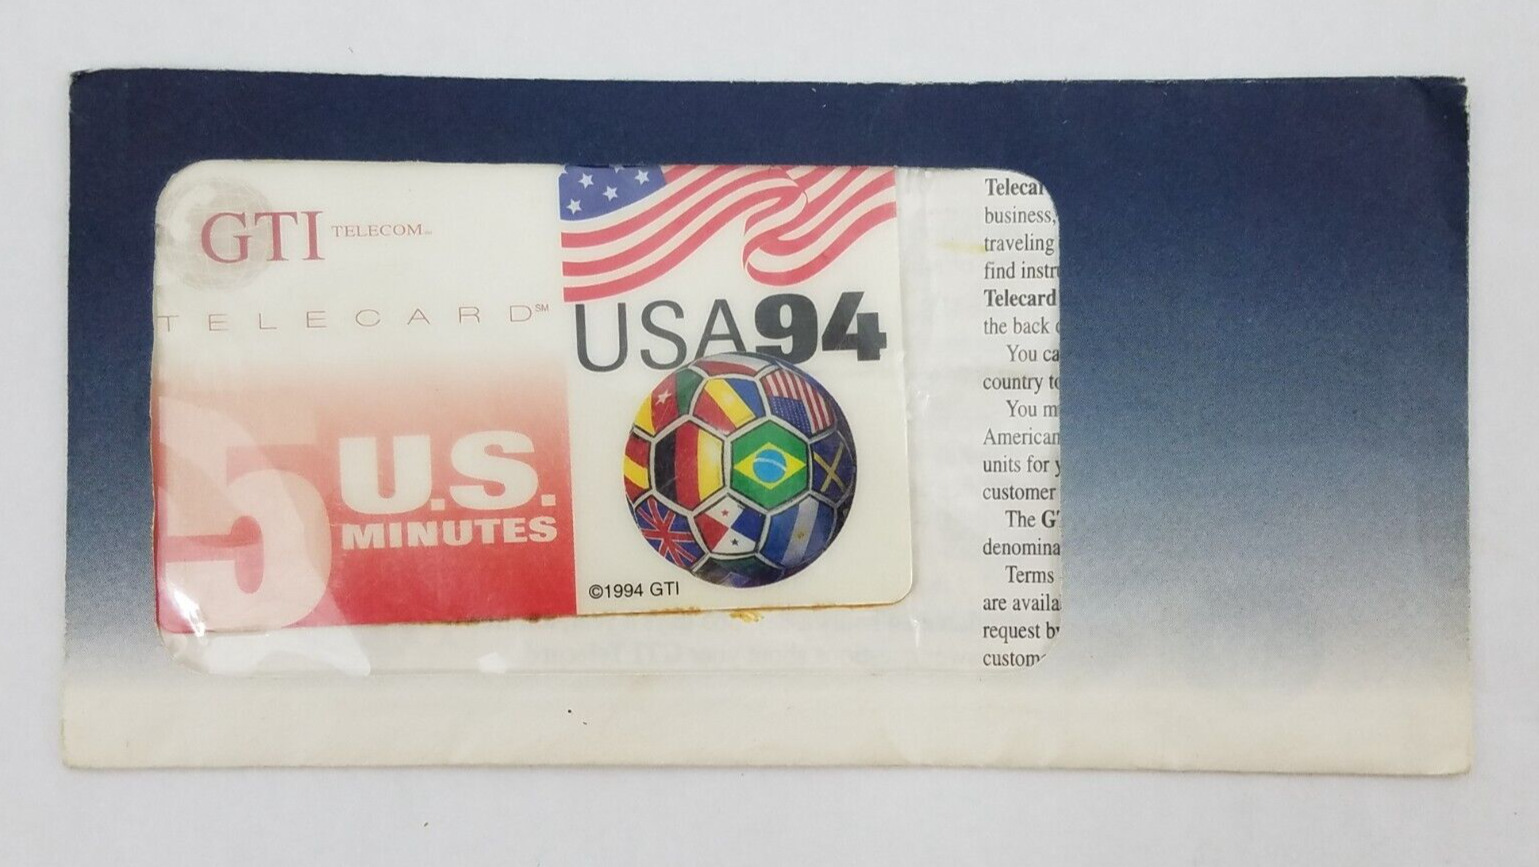 GTI Telecom 5 US Minutes World Cup USA 94\'Soccer Phone Card Expired